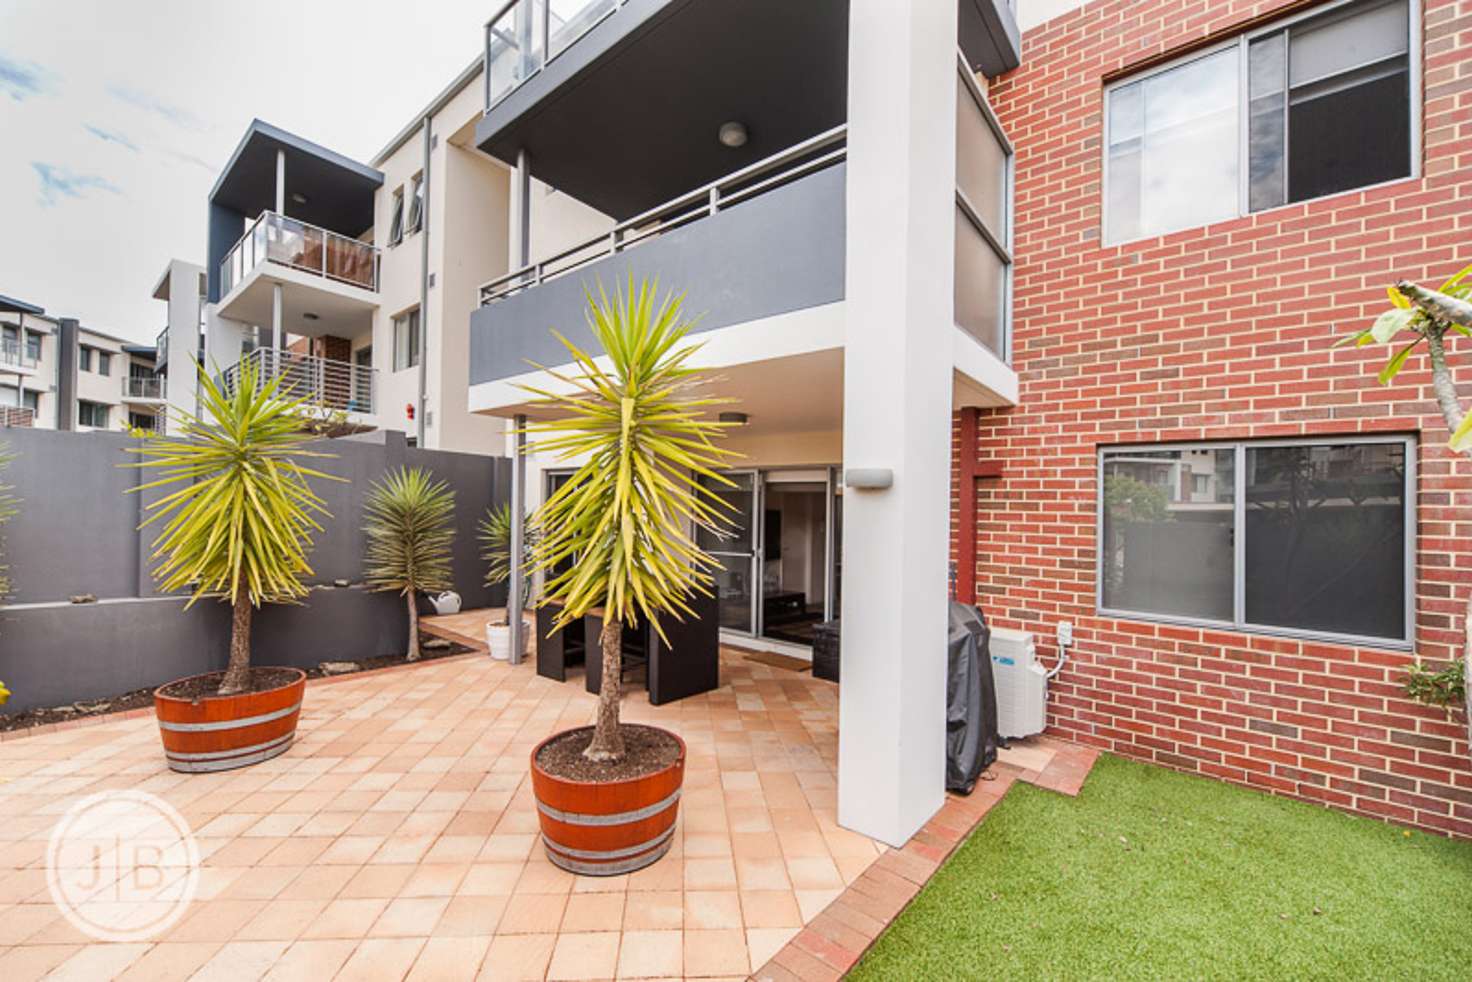 Main view of Homely apartment listing, 24/189 Swansea Street EAST, East Victoria Park WA 6101